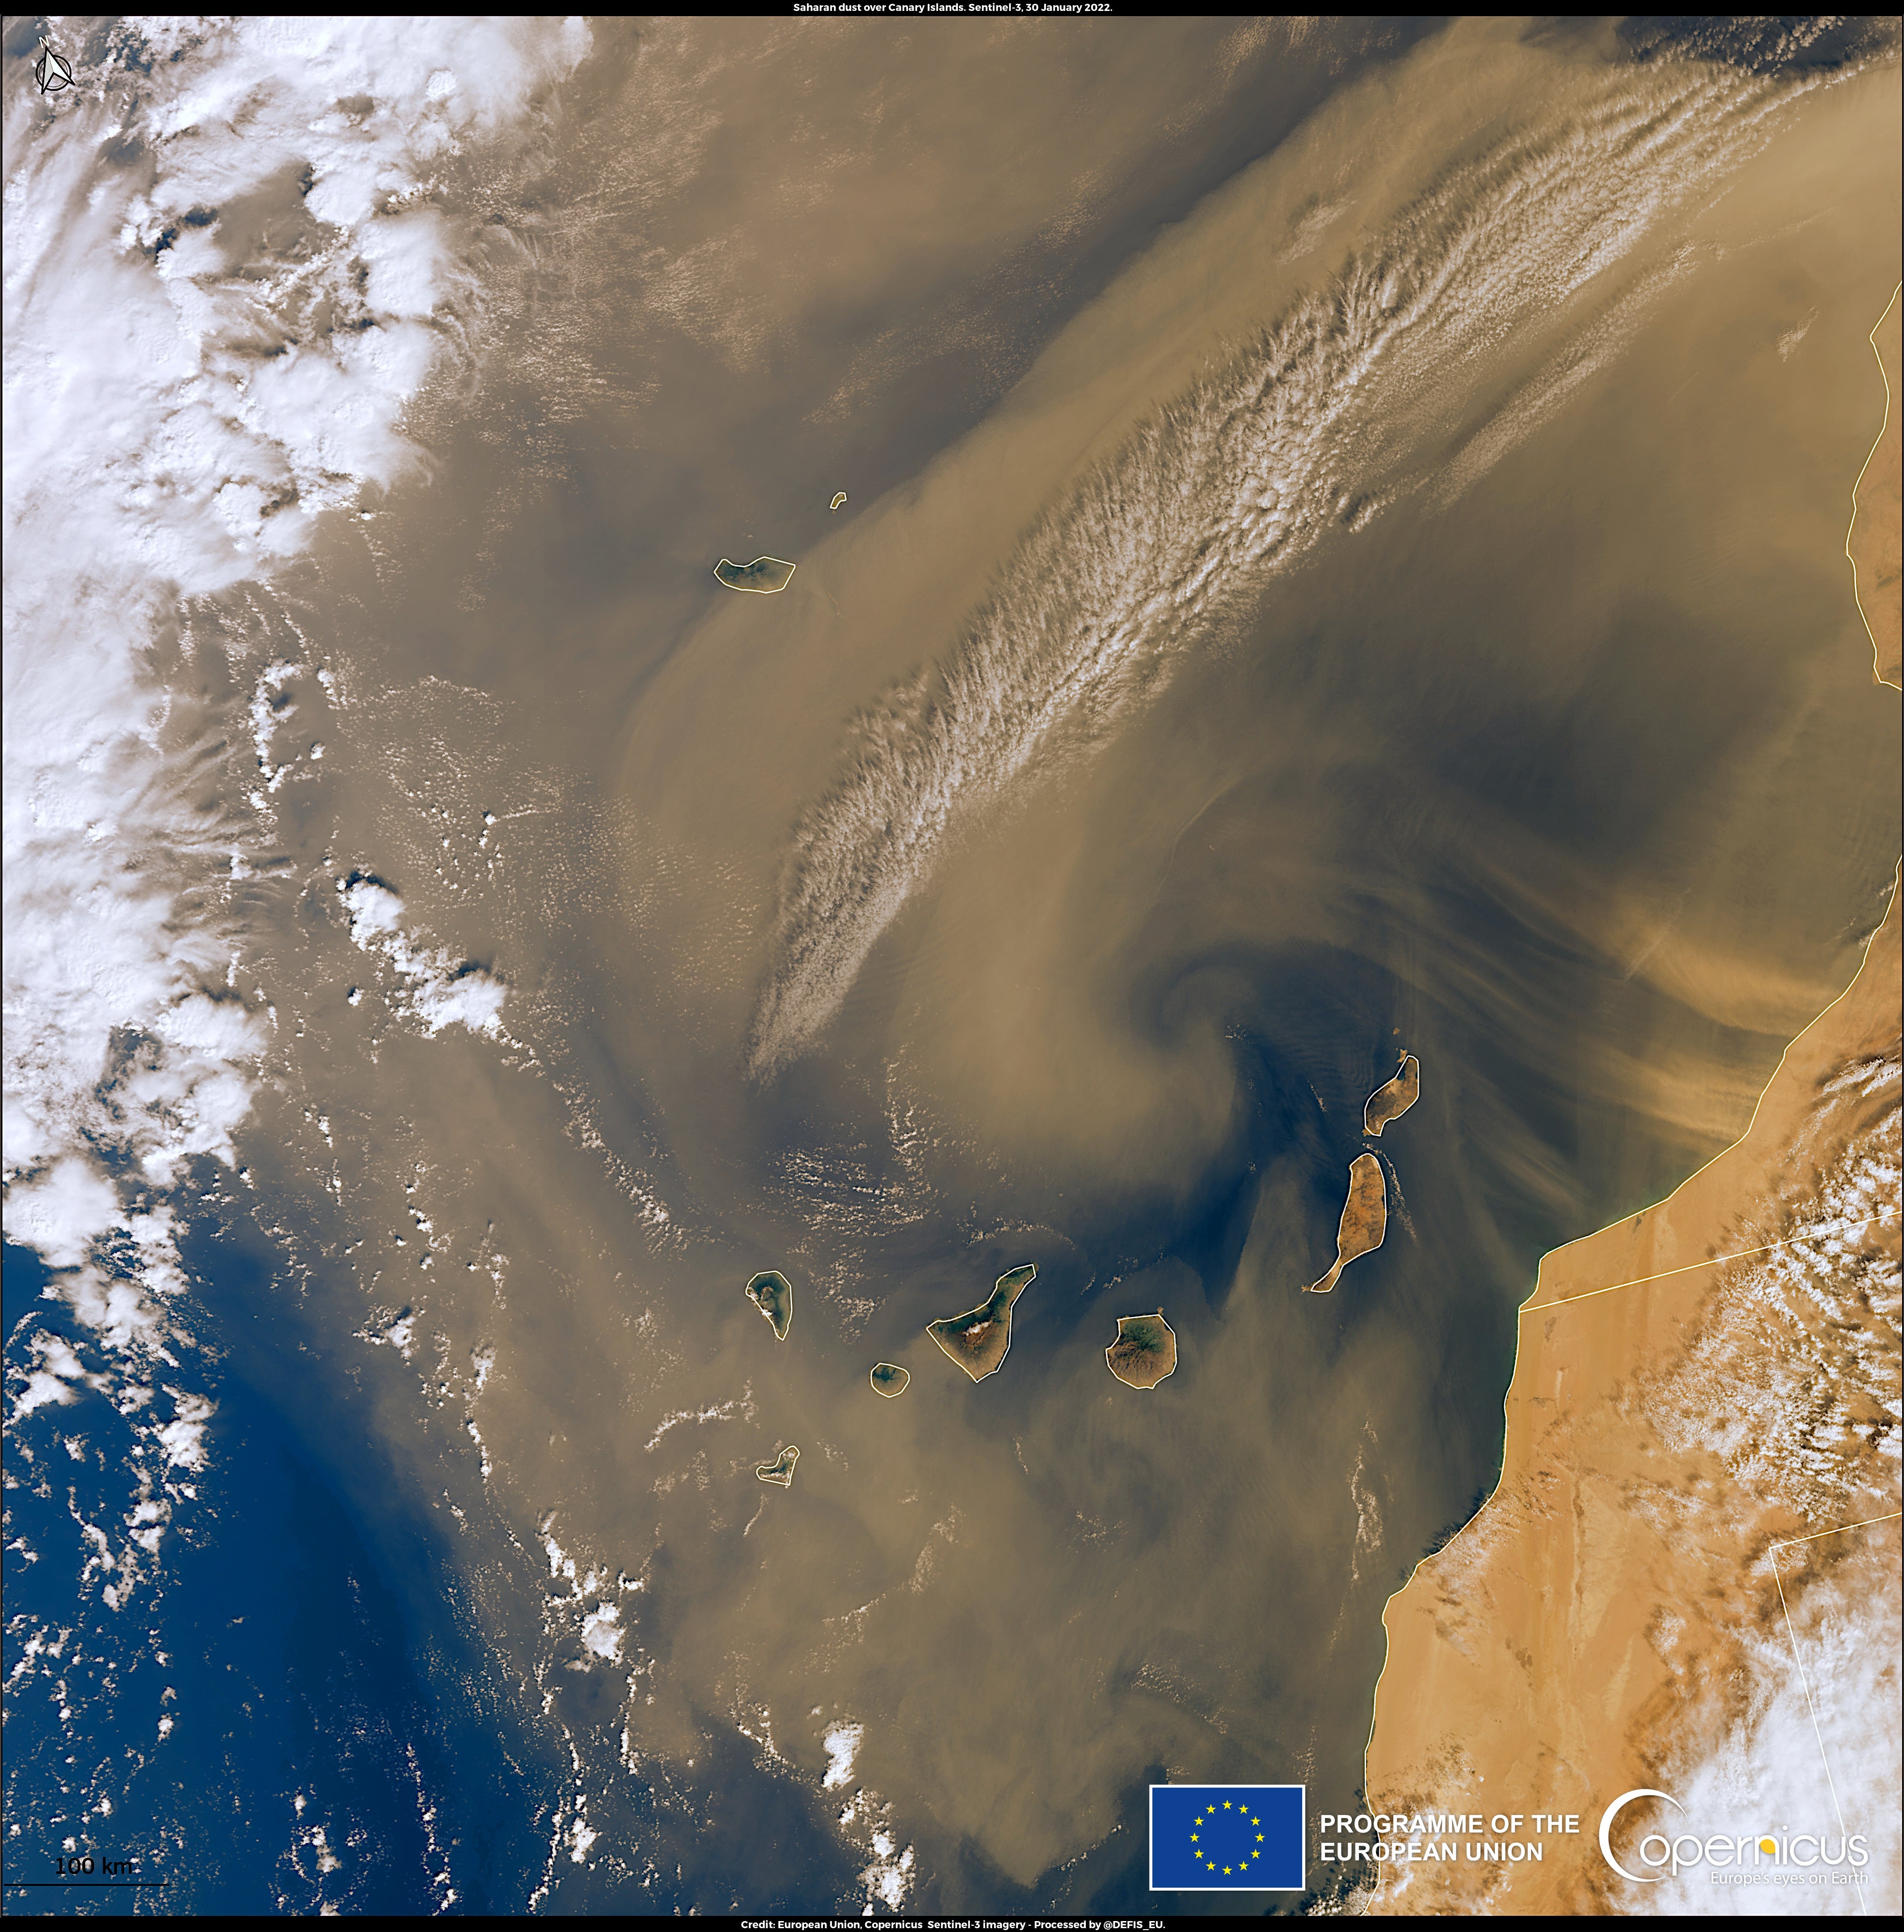 This image of the vast cloud was taken by the European Union Copernicus Sentinel-3 satellite